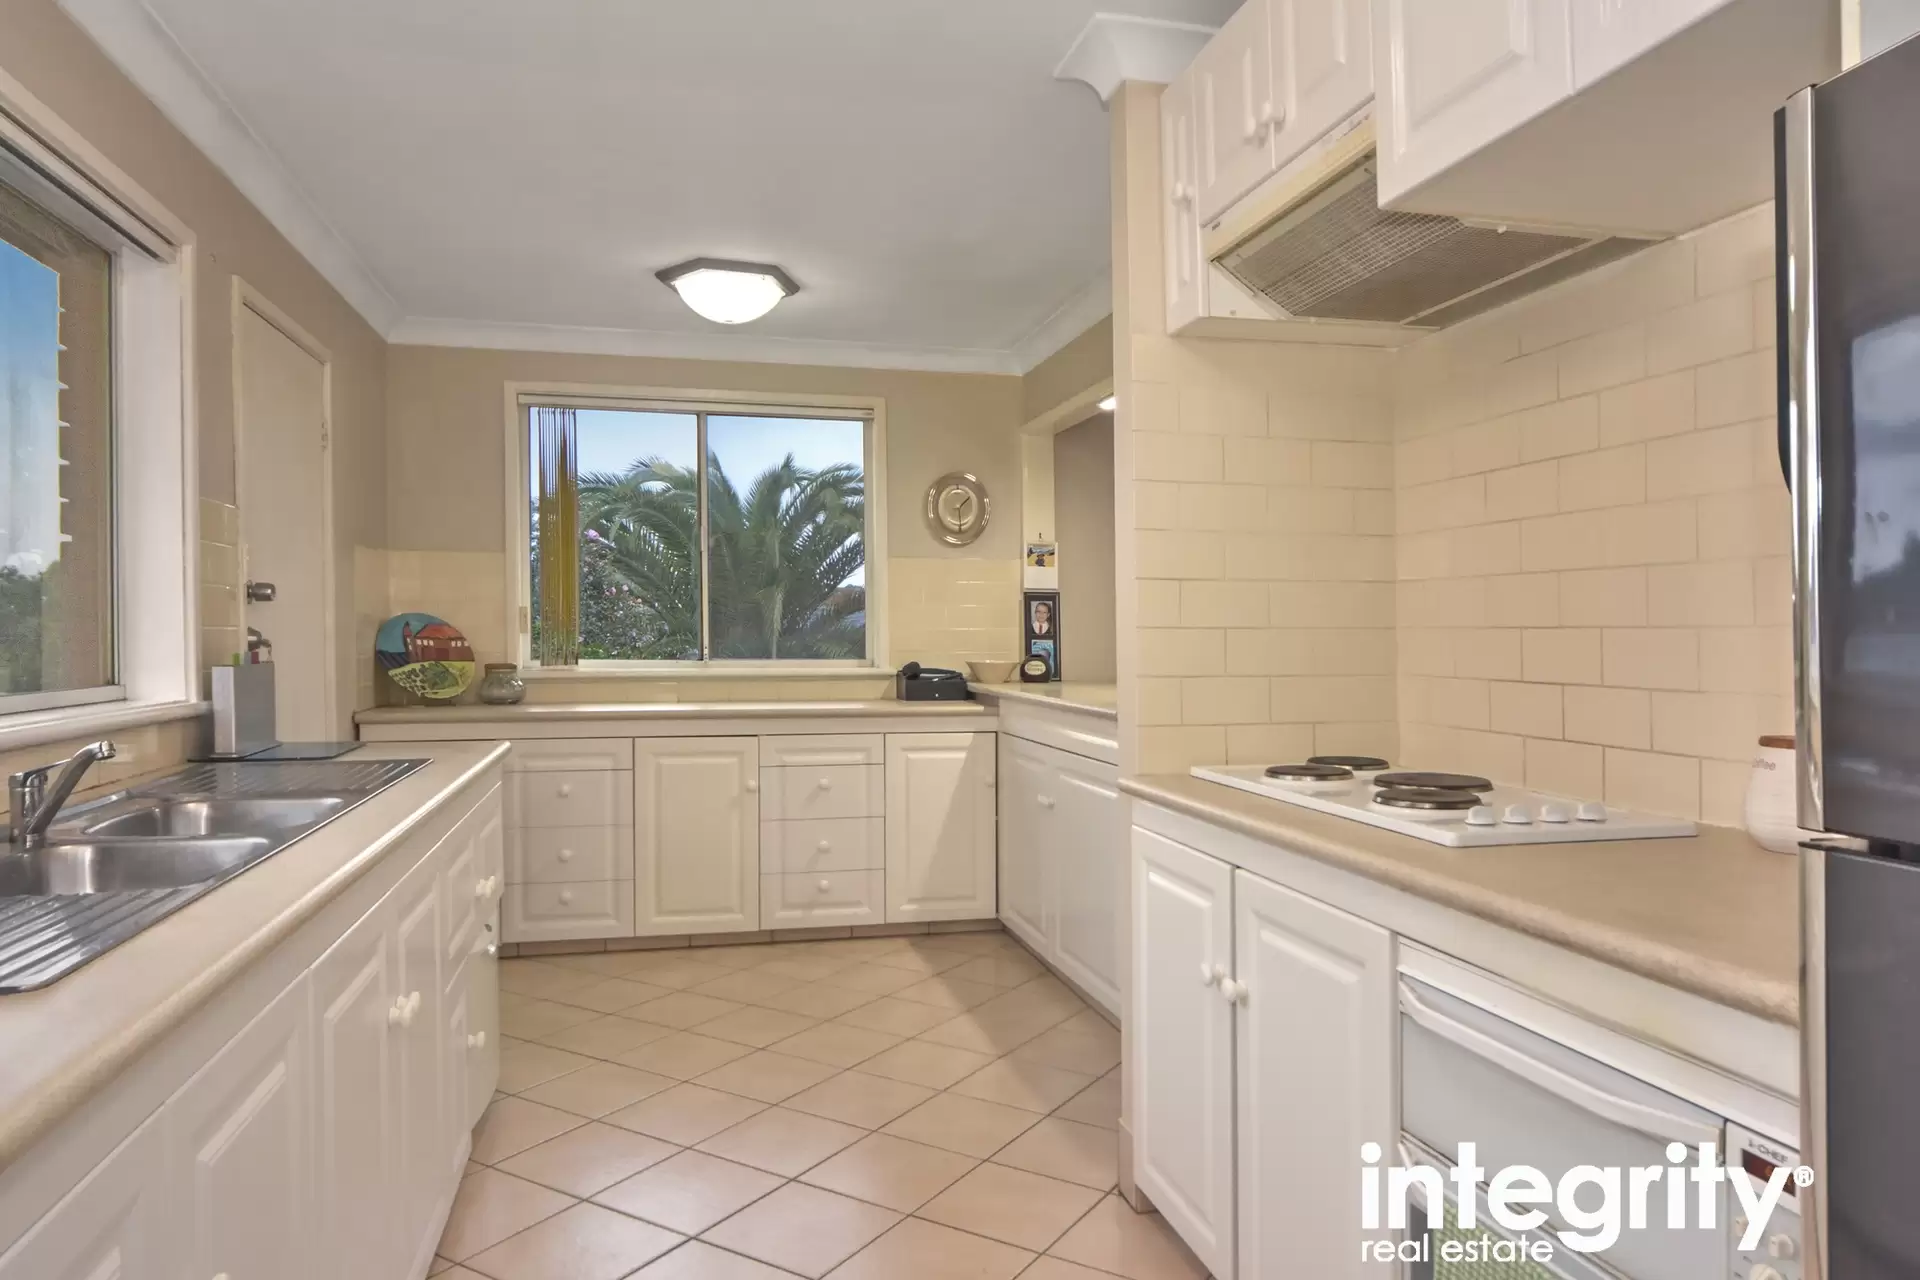 76 West Birriley Street, Bomaderry Sold by Integrity Real Estate - image 4